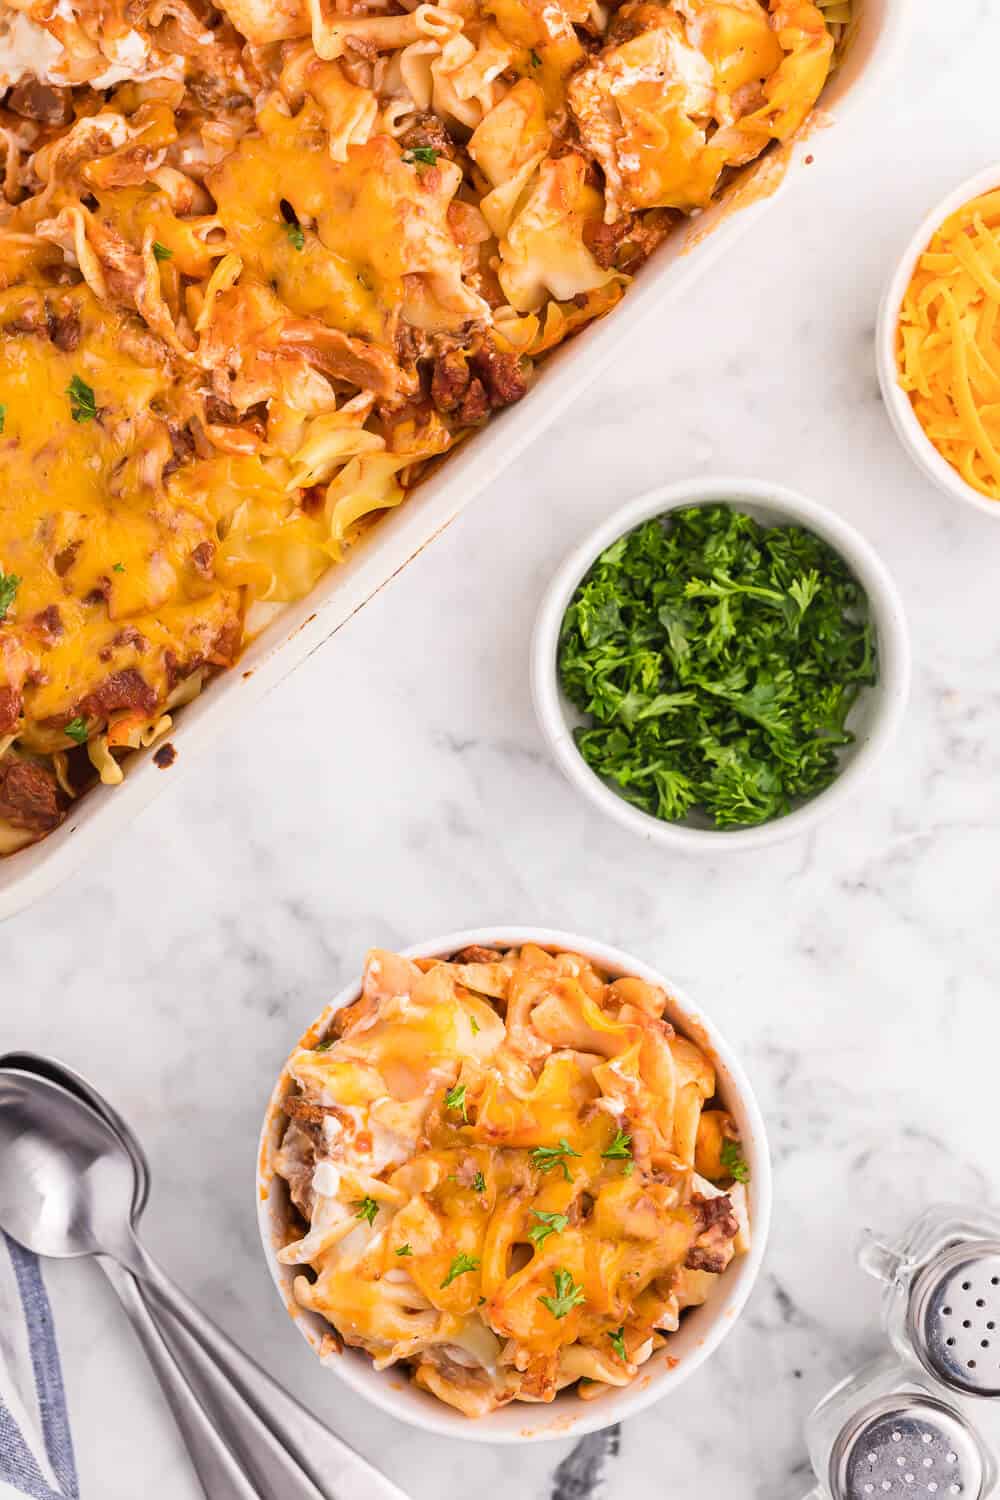 Cheesy Hamburger Supper - This casserole might remind you of a lasagna. It has the same cheesy tomato flavours, but the addition of cream cheese makes it even better!